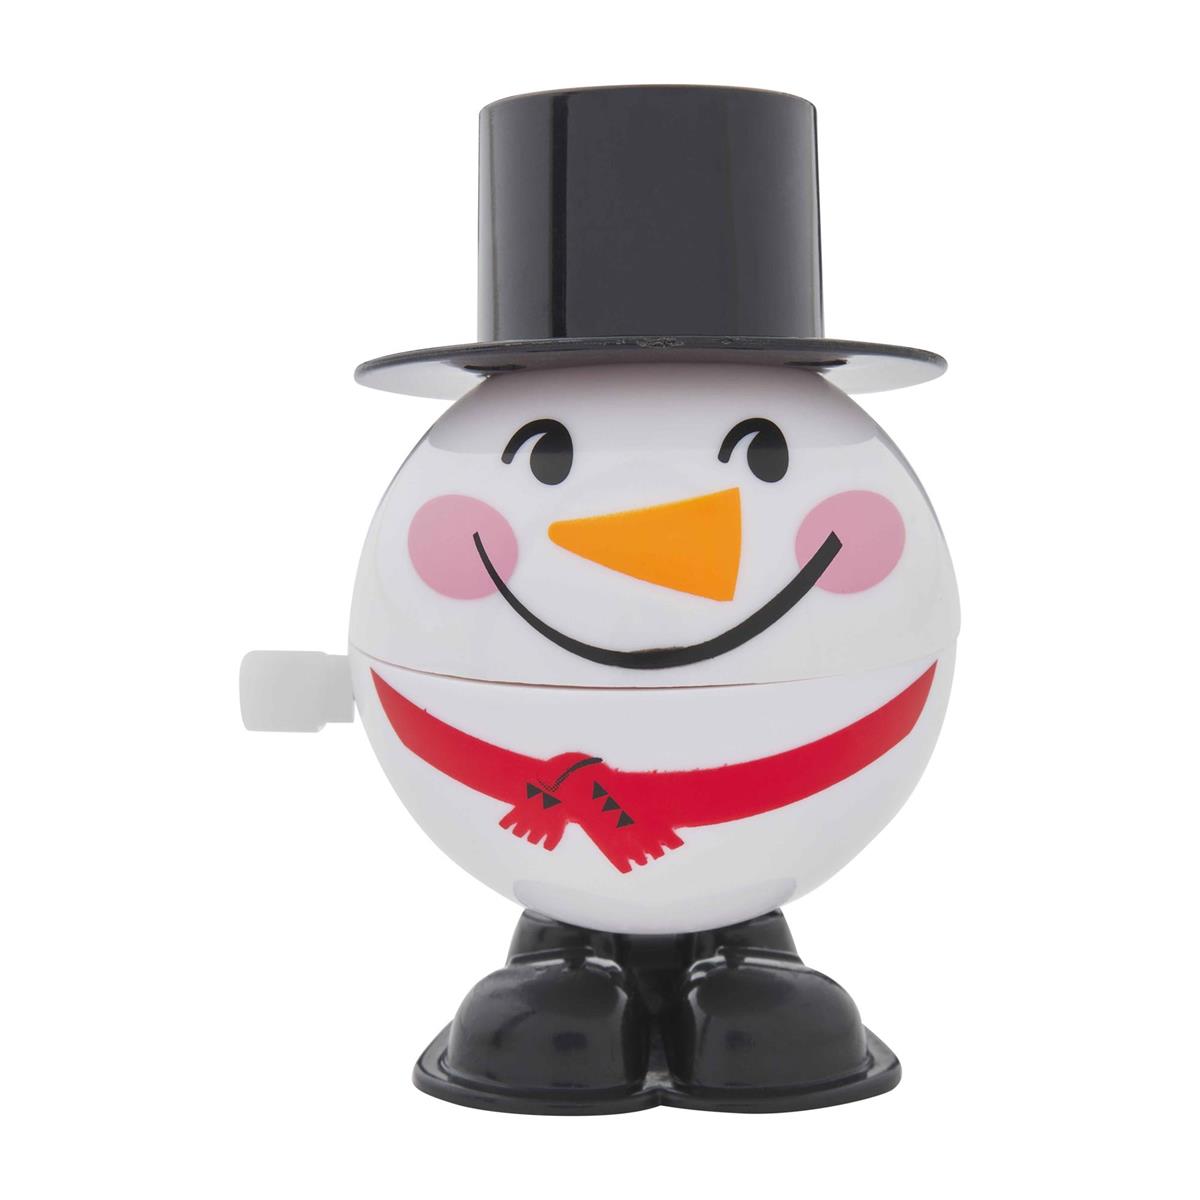 Round Christmas Wind-Up Toy - Snowman